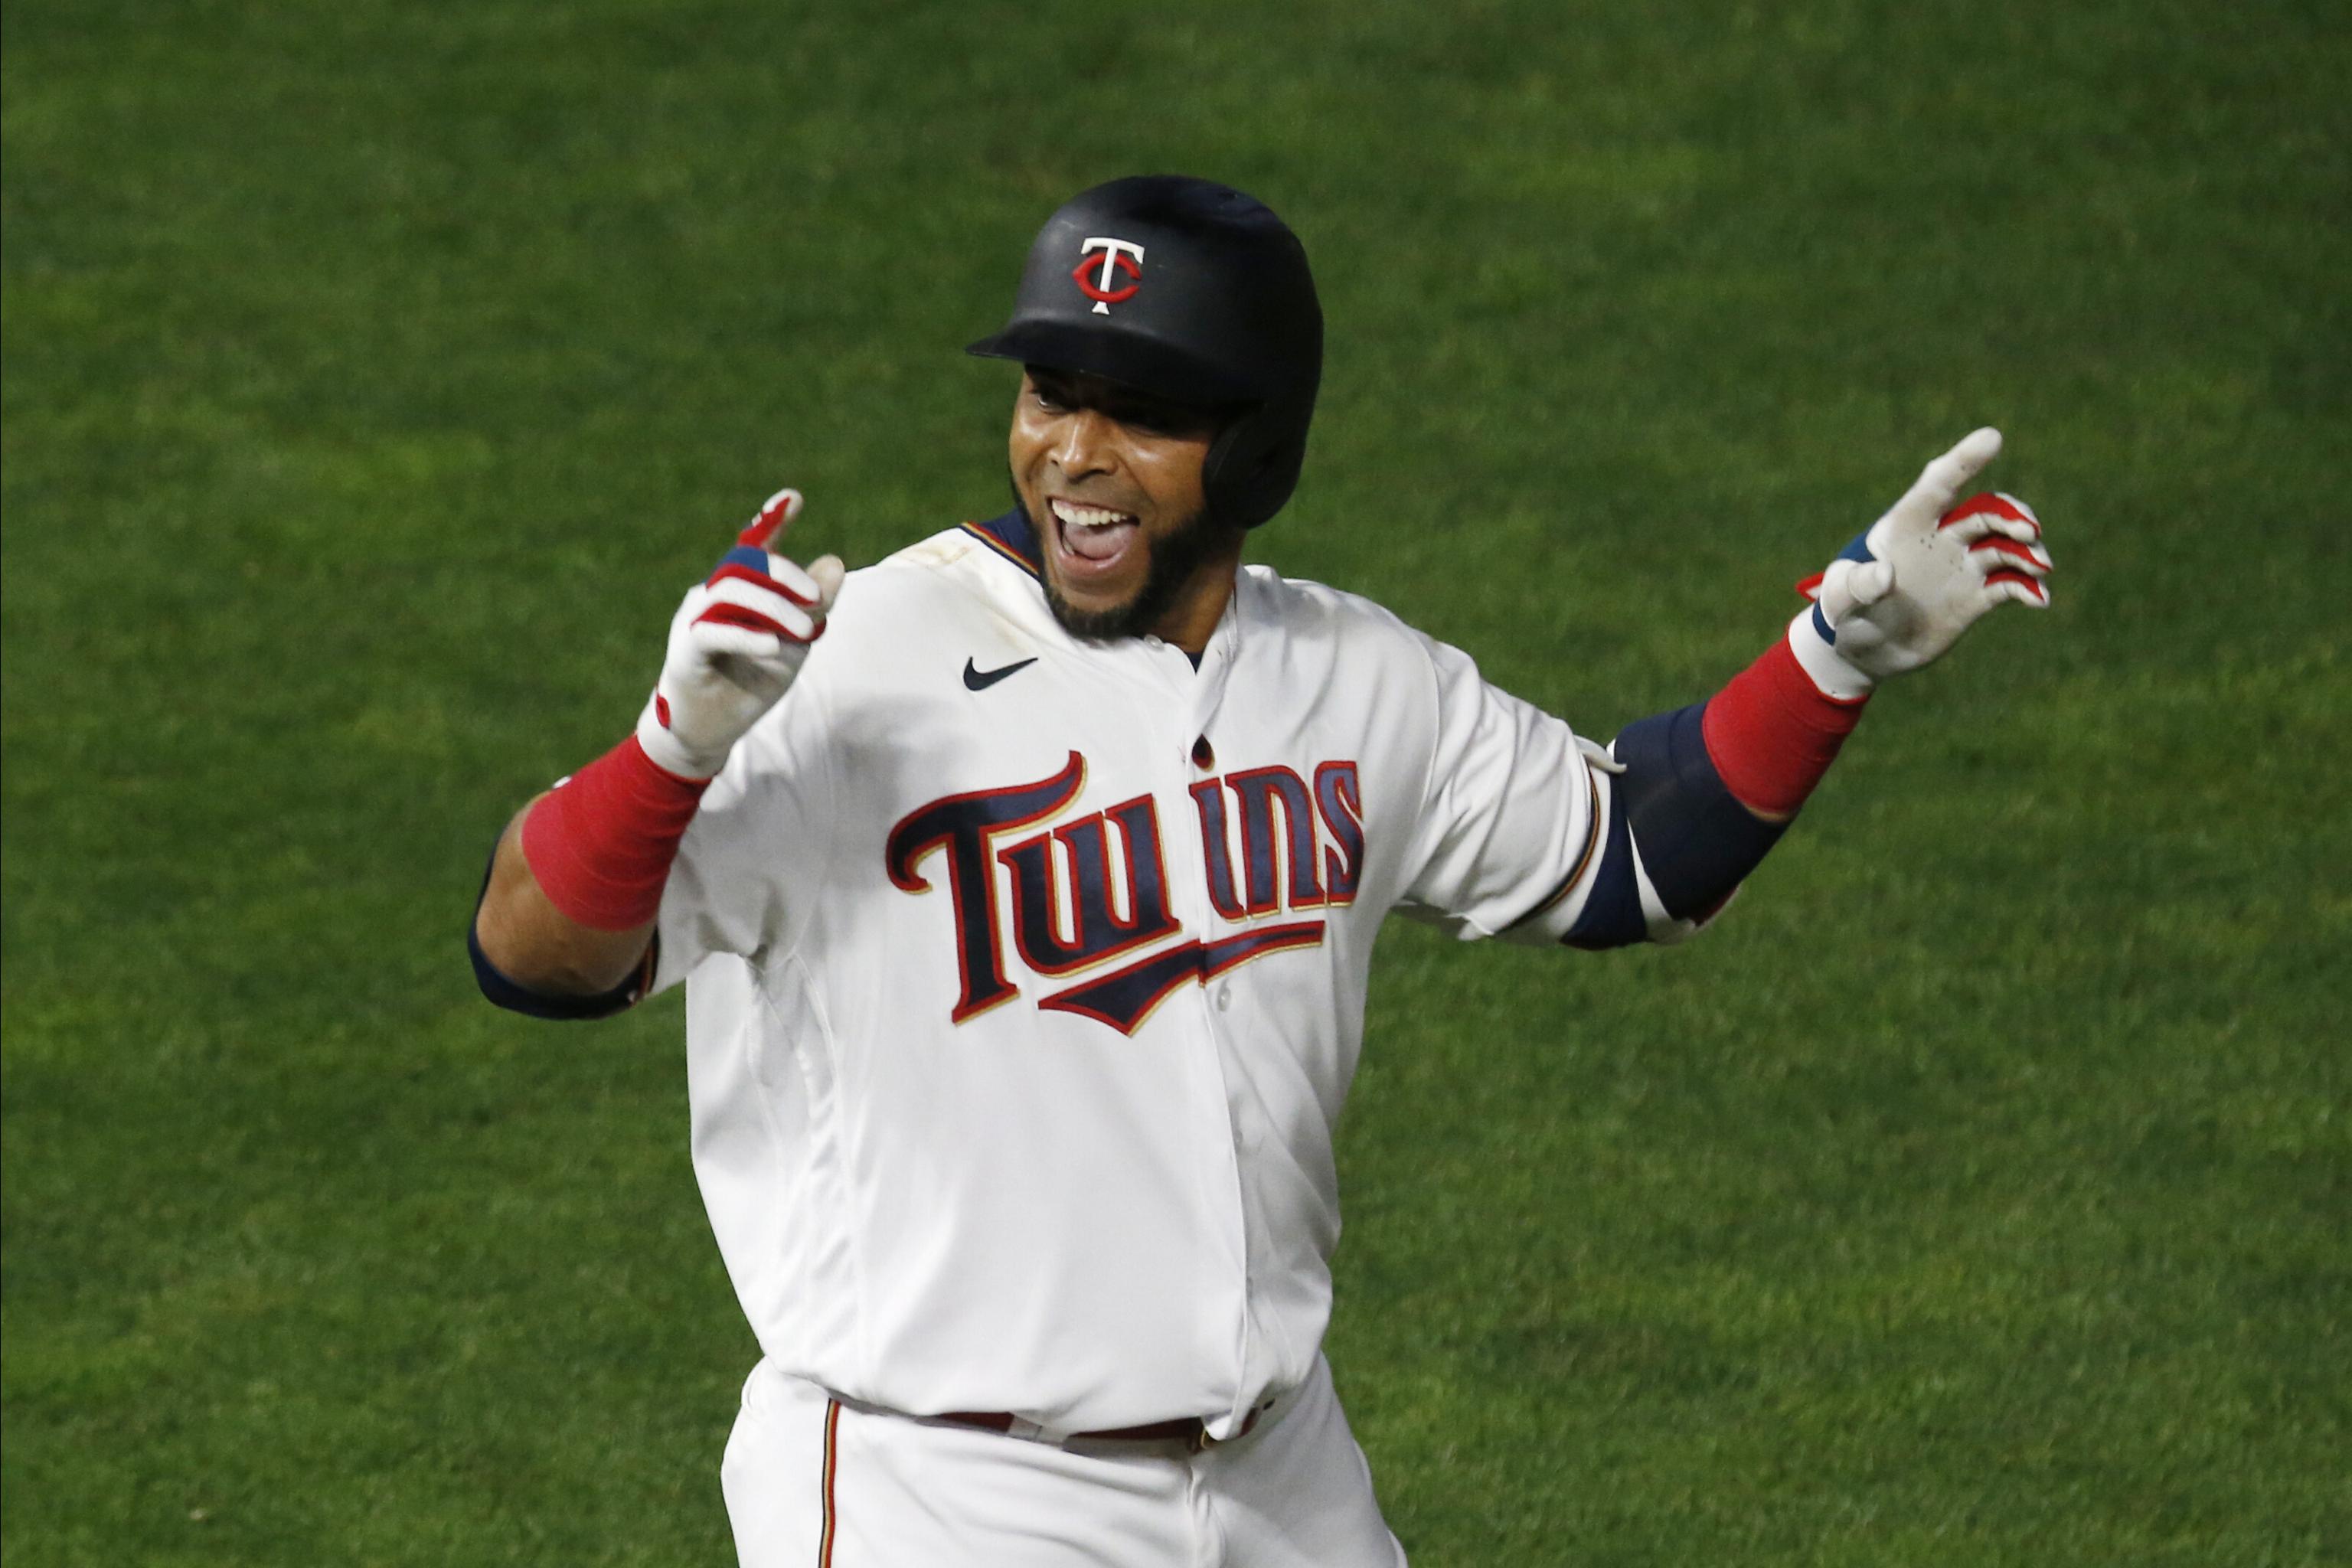 SKOR North on X: HE GONE: The Miguel Sano era with the #MNTwins